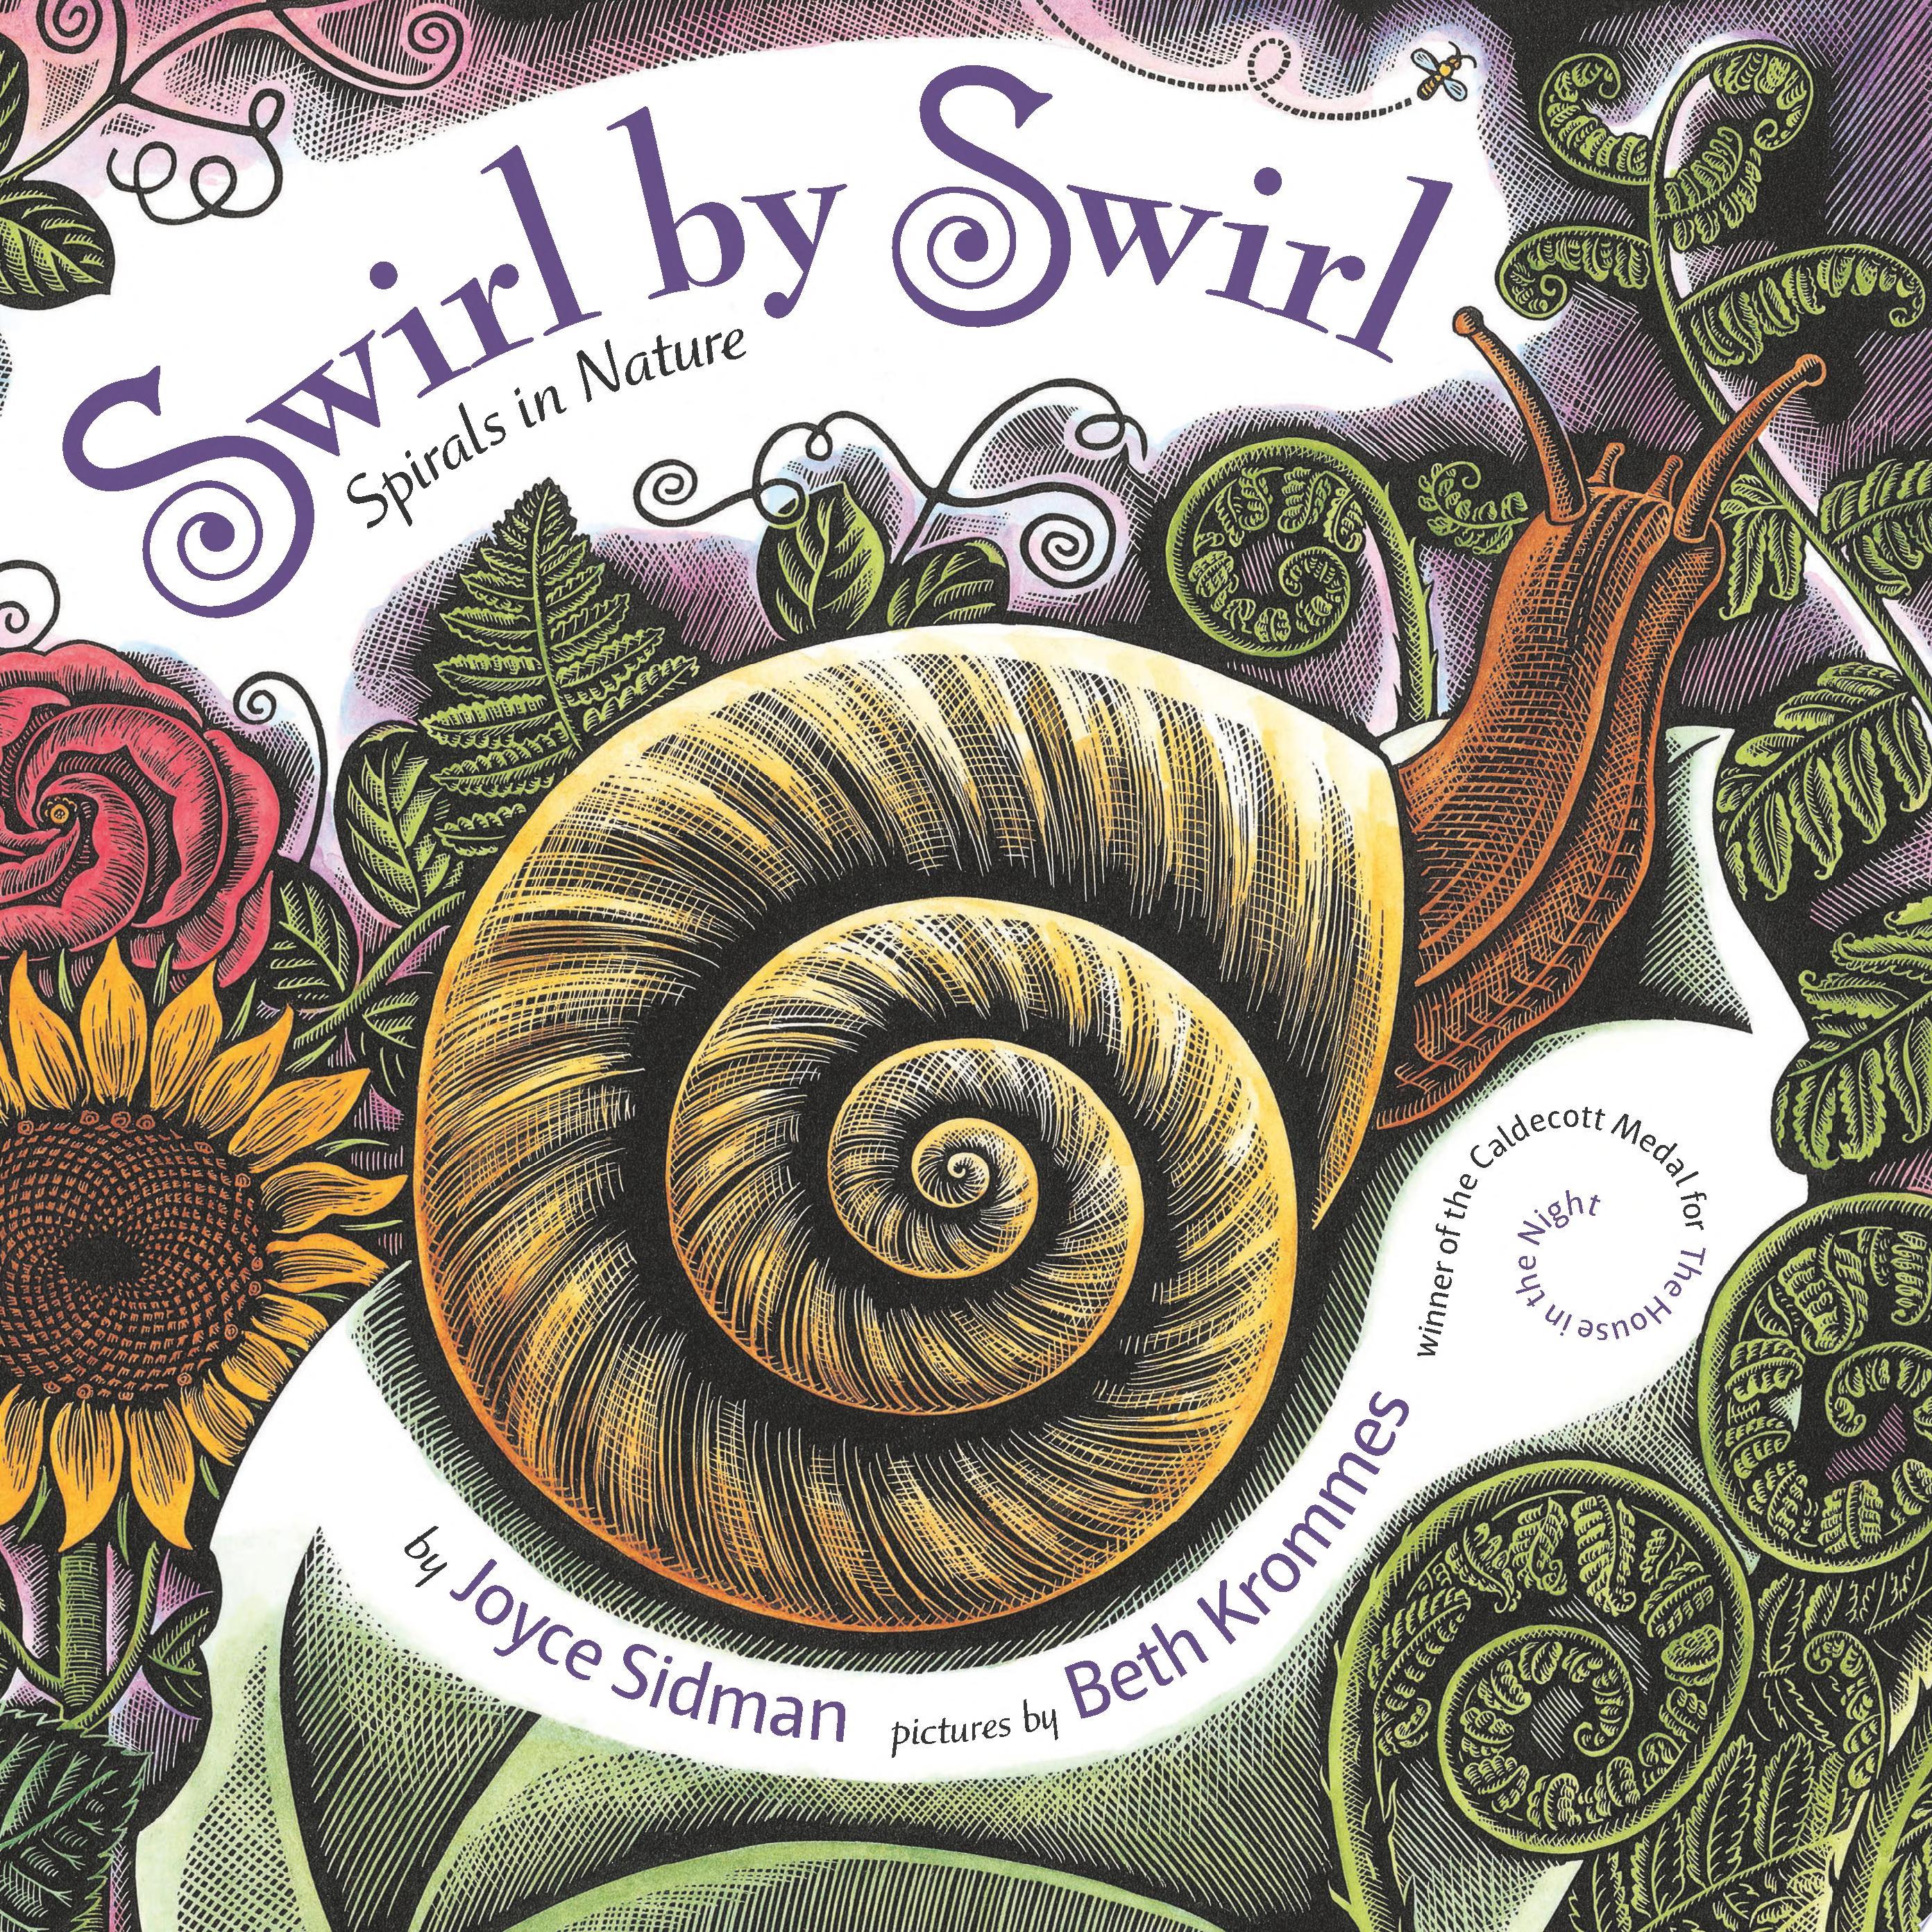 Image for "Swirl by Swirl"